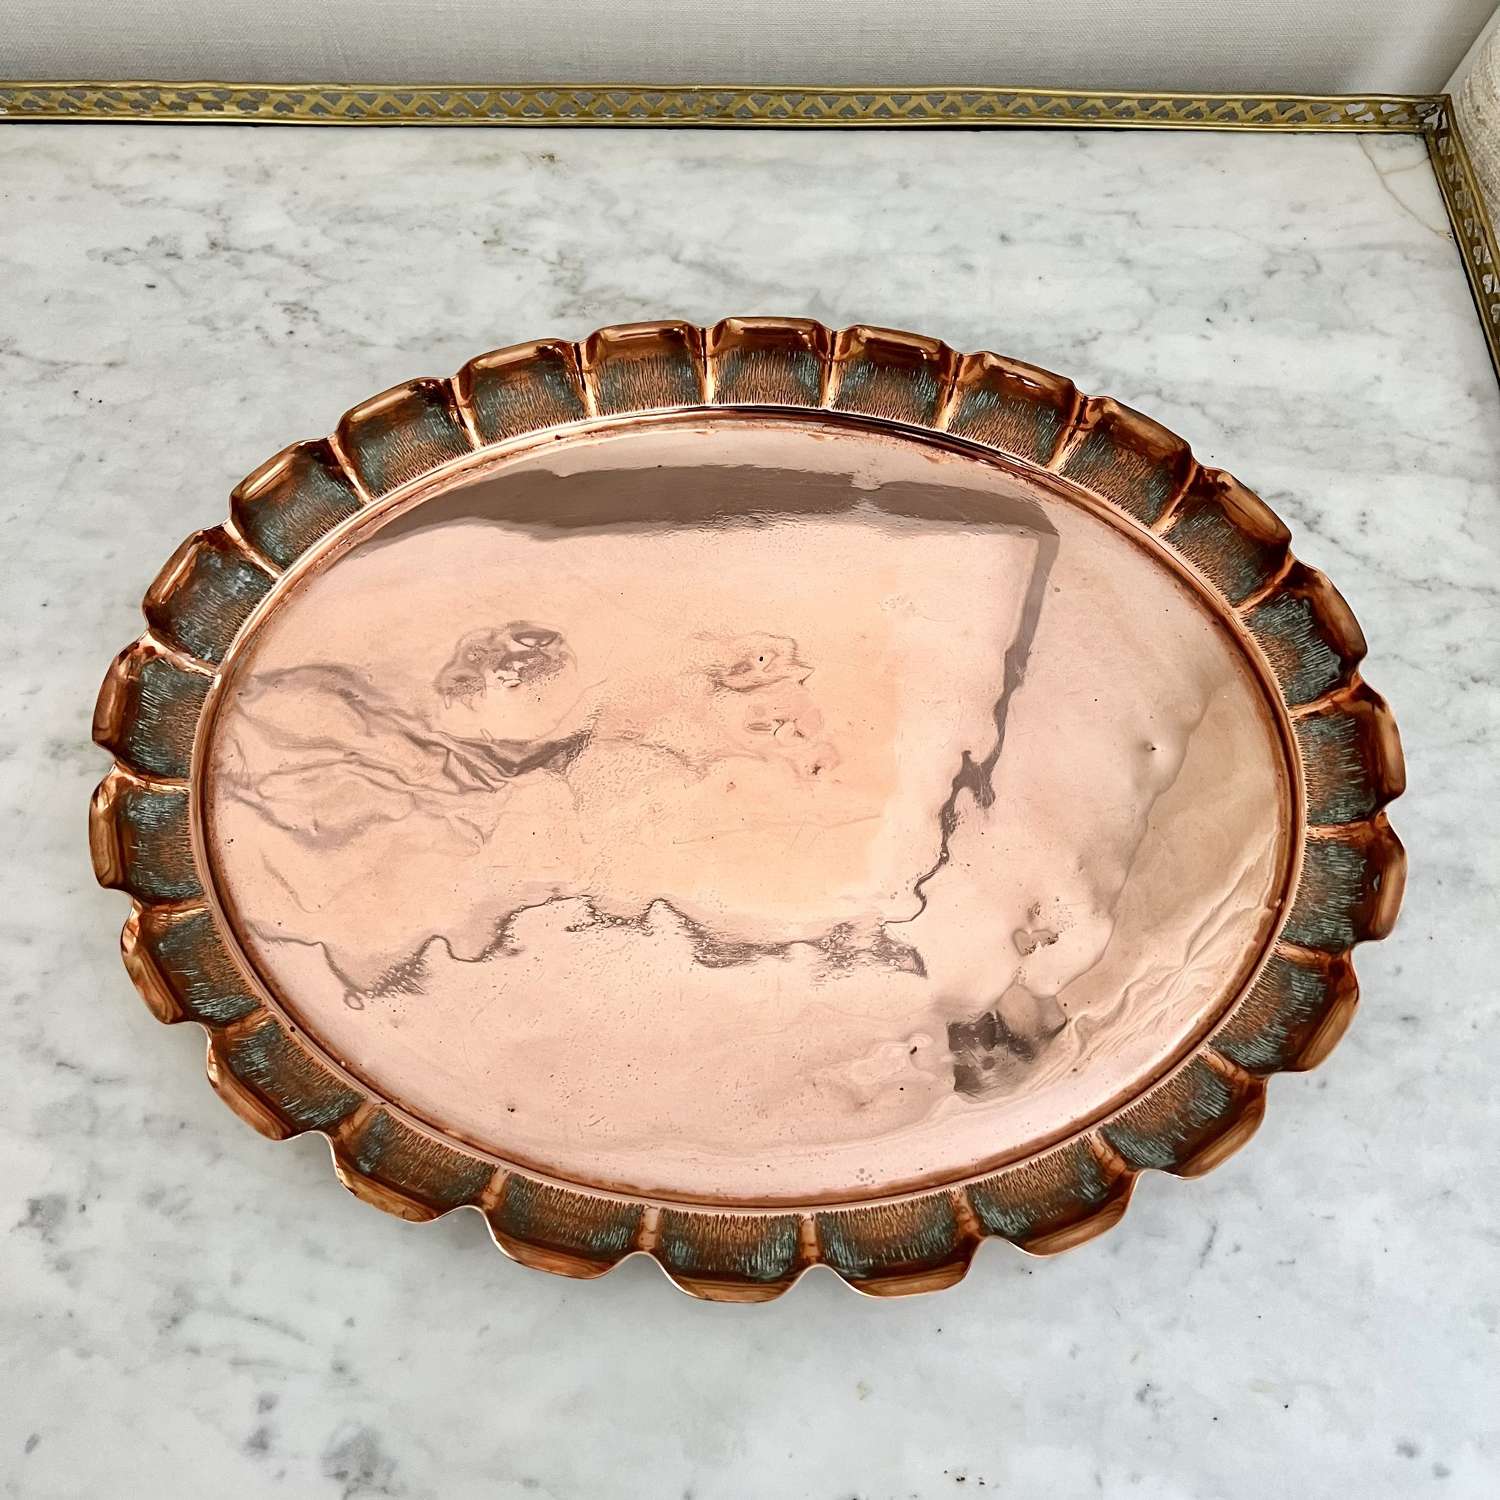 English Copper Pie Crust Oval Serving Tray 1910s